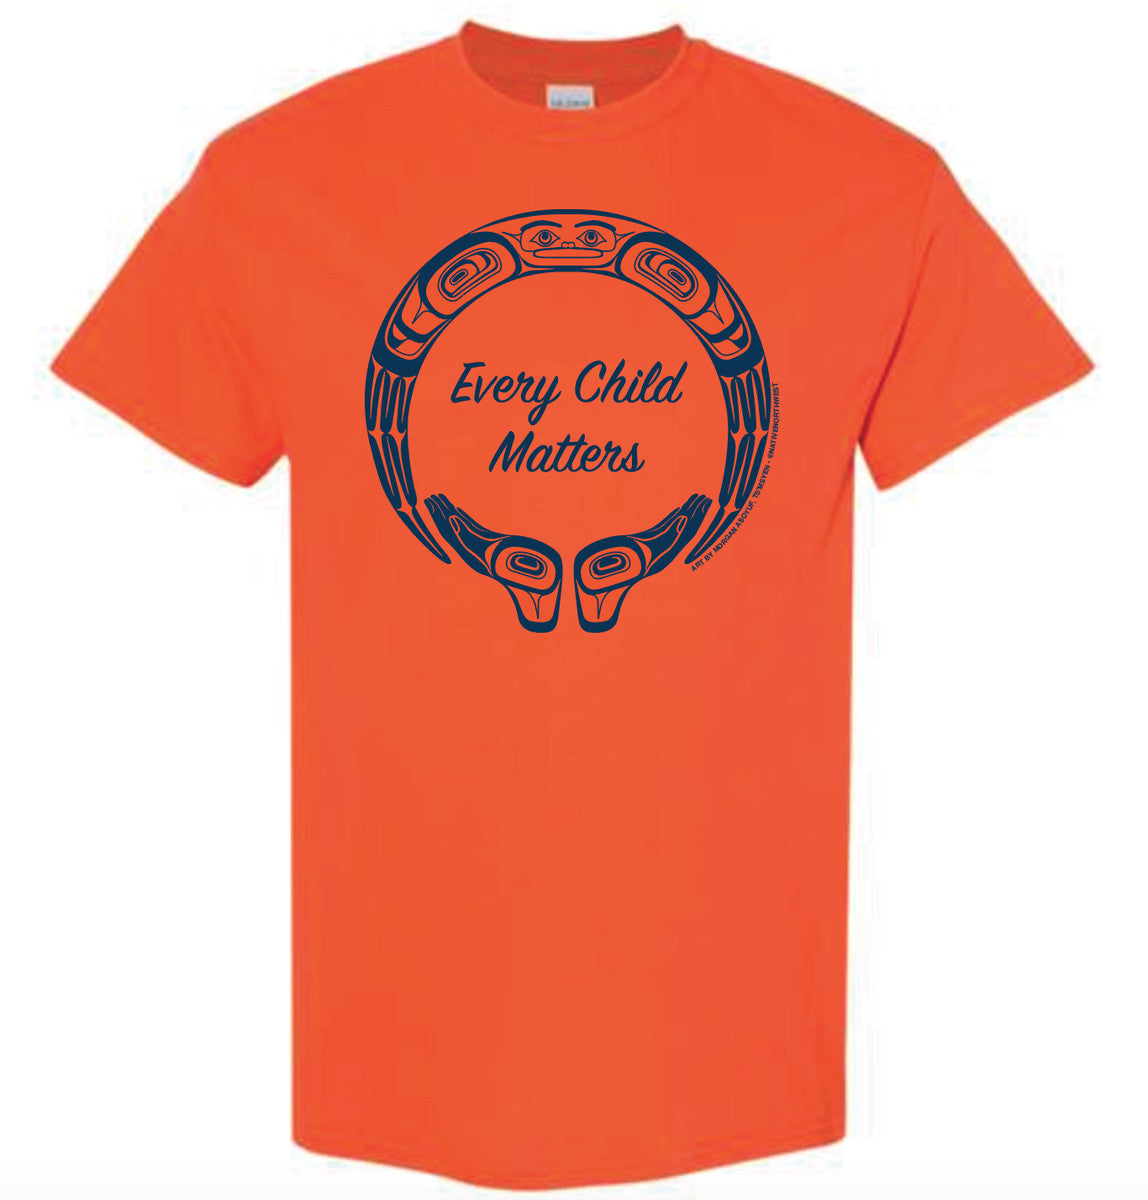 2022 - Orange Cotton T-Shirt - “Every Child Matters” by Morgan Asoyuf